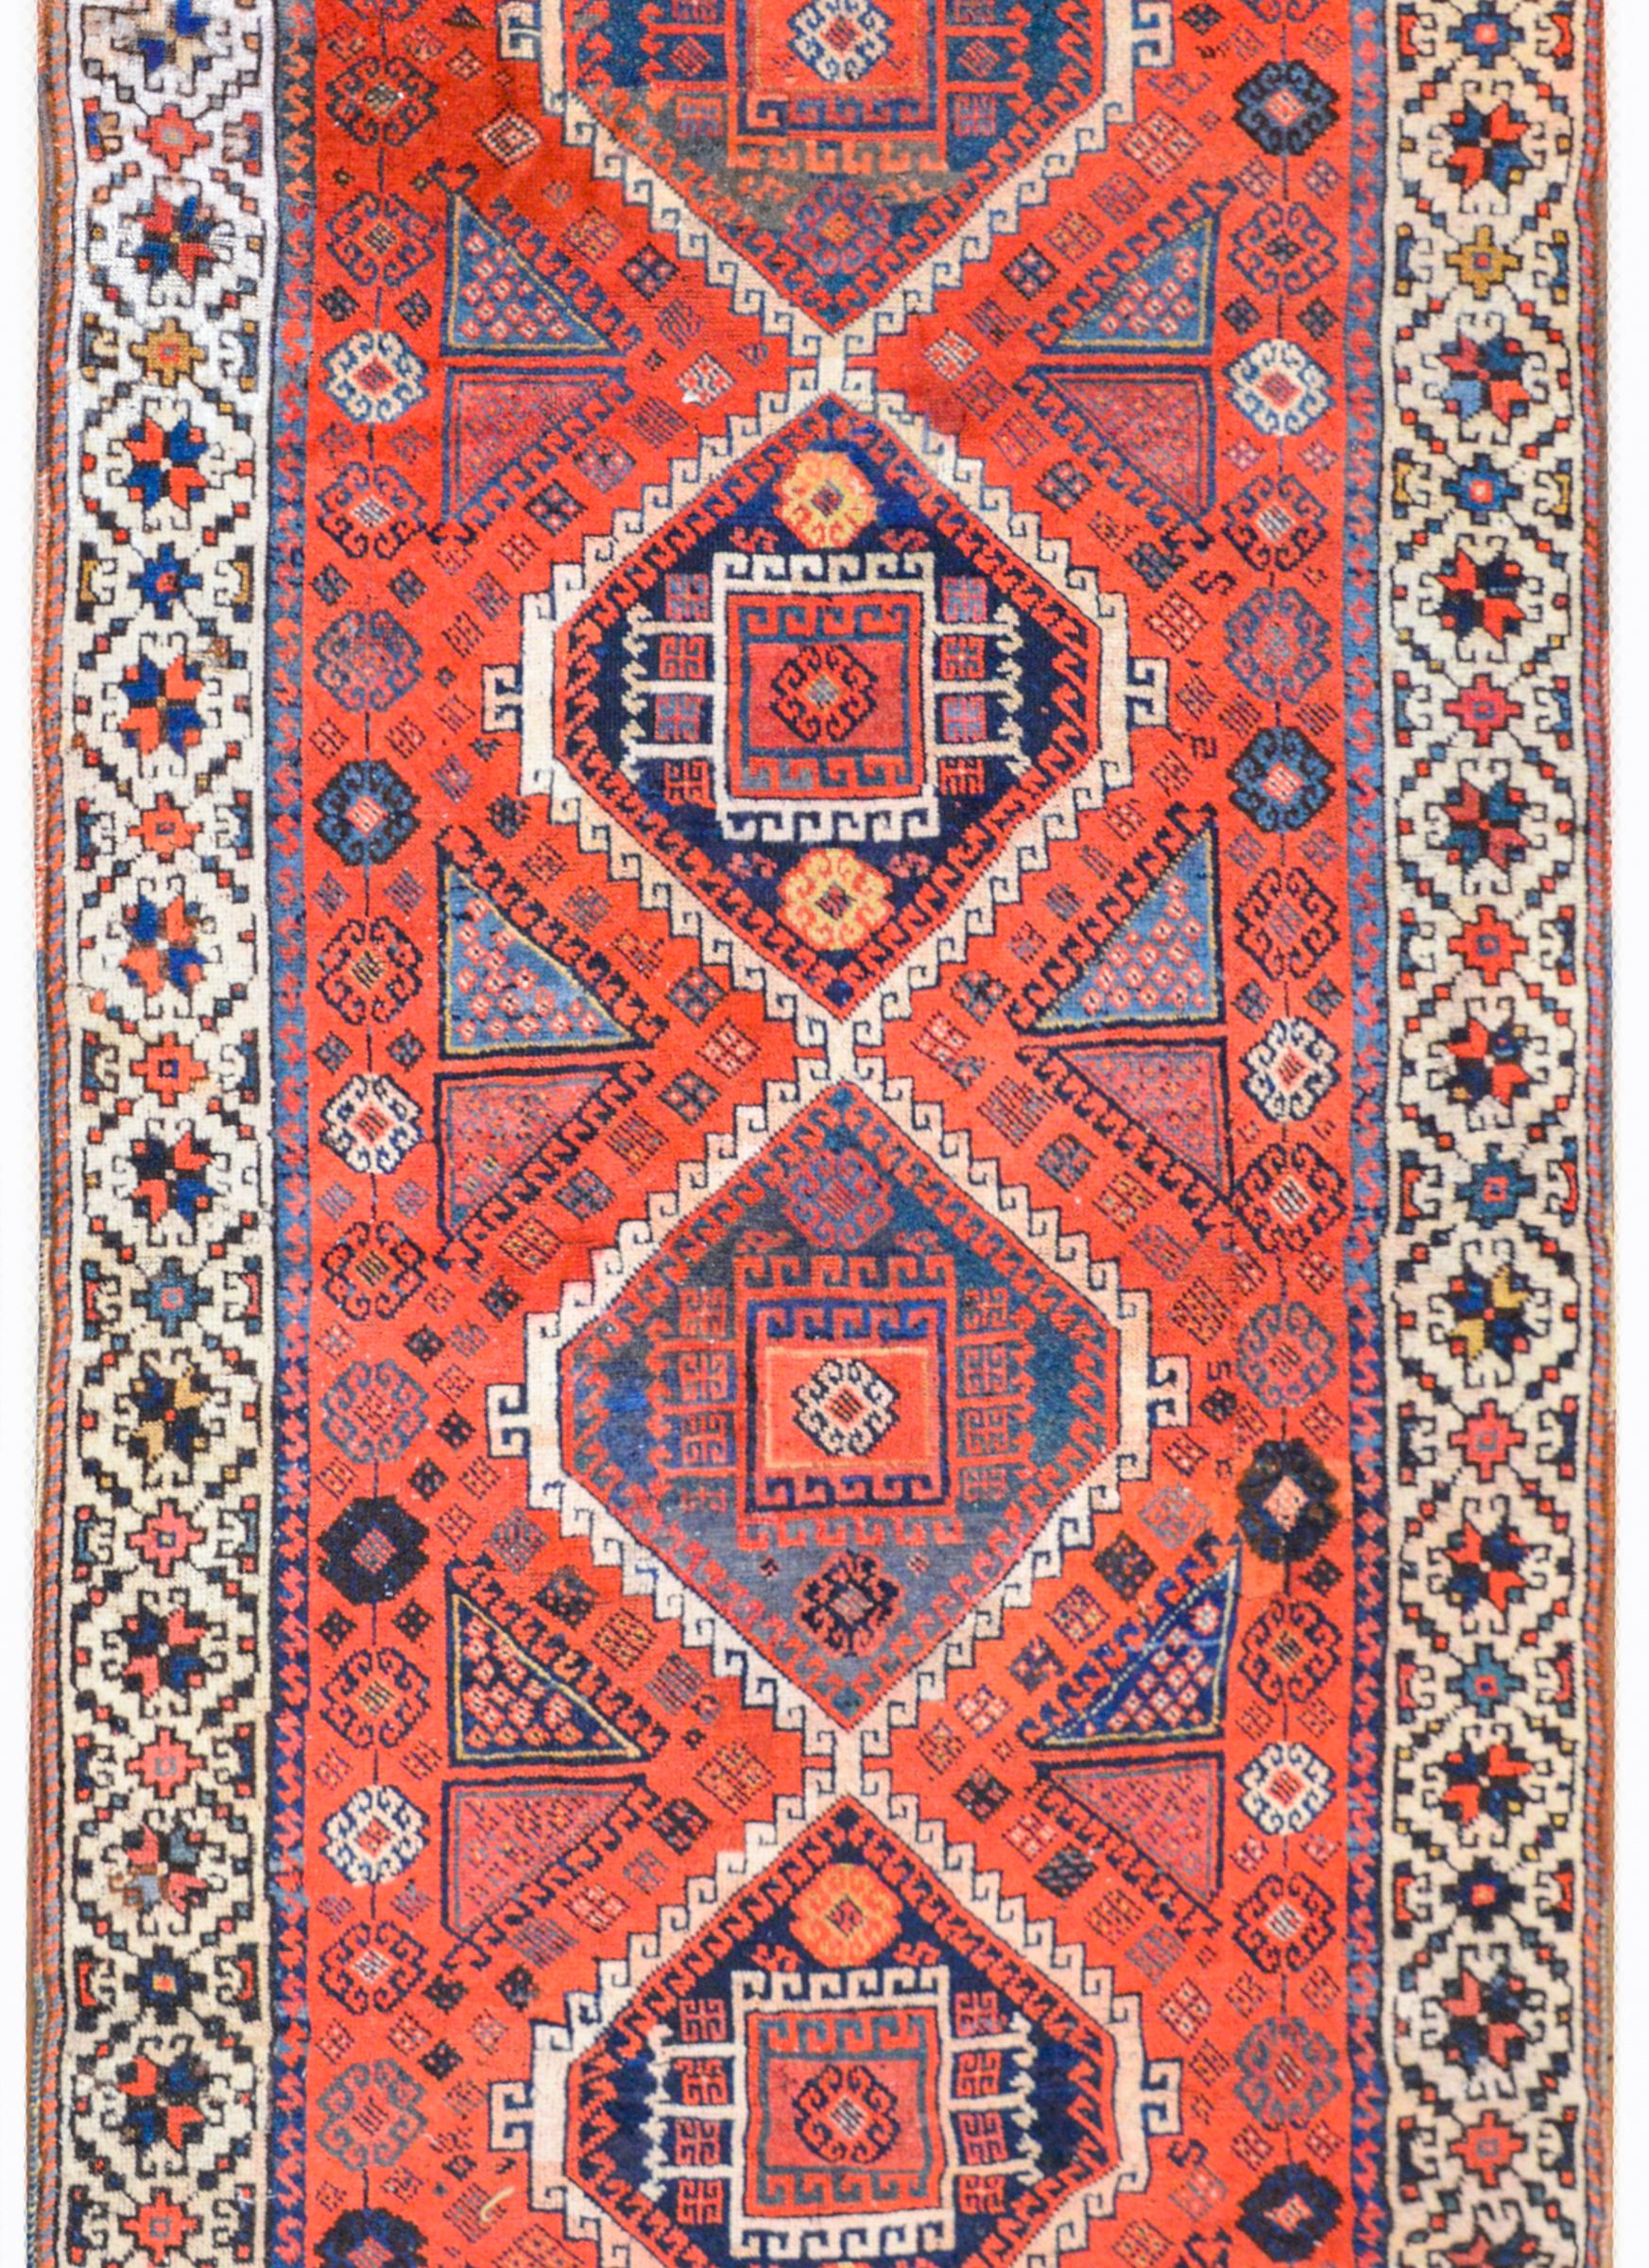 A wonderful early 20th century Eastern Anatolian Kurdish rug with four diamond medallions each with a stylized floral and vine pattern woven in crimson, indigo, white, and cream-colored wool amidst a field of densely woven stylized flowers against a